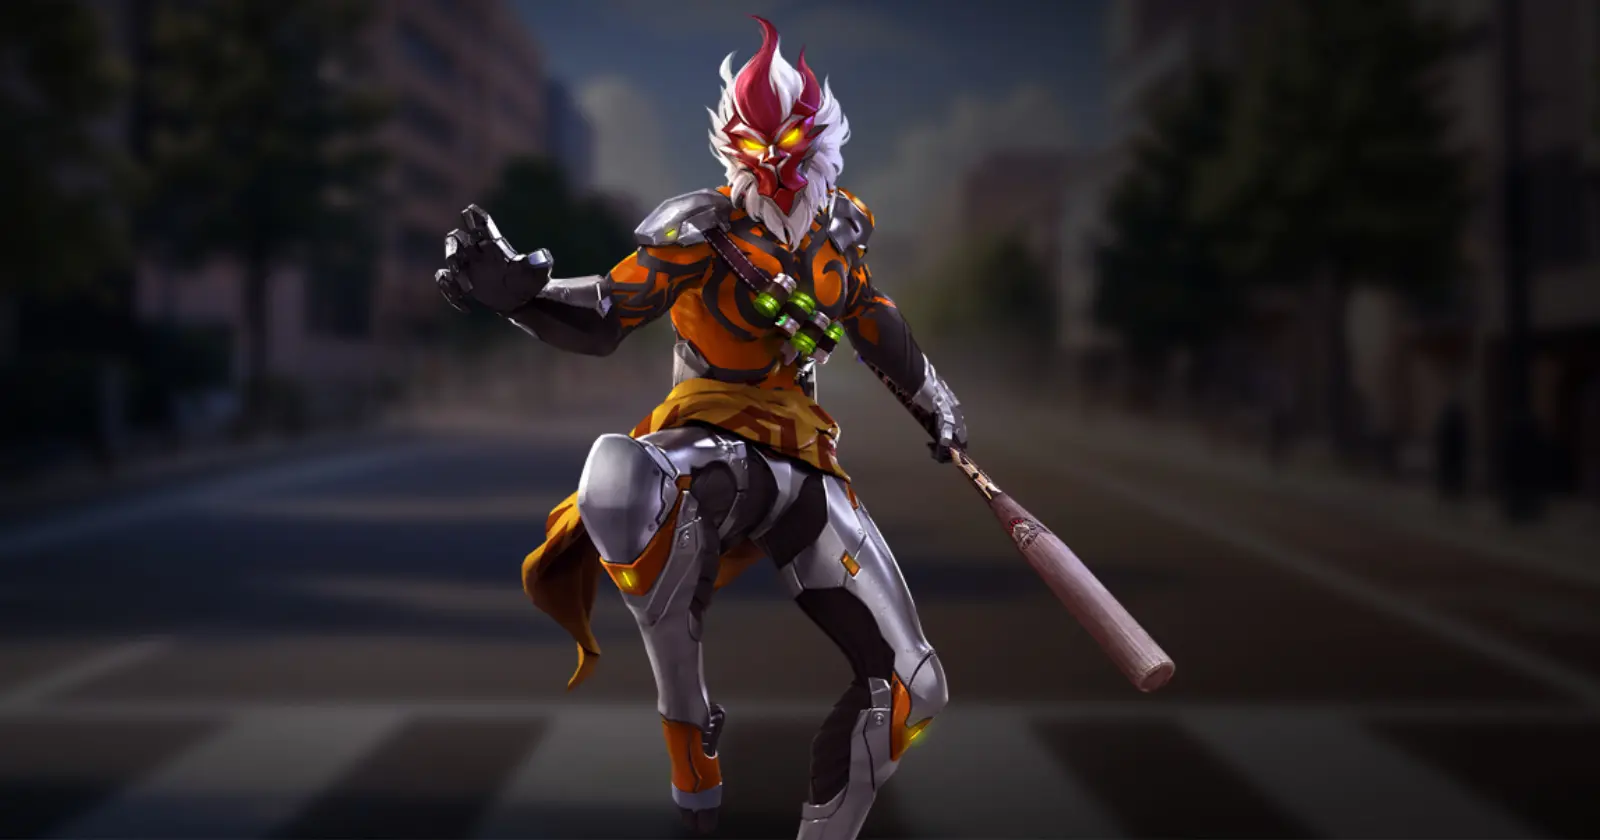 wukong character with a white and red mask, wearing an orange and grey armor, holding a baseball bat, background is blur street.